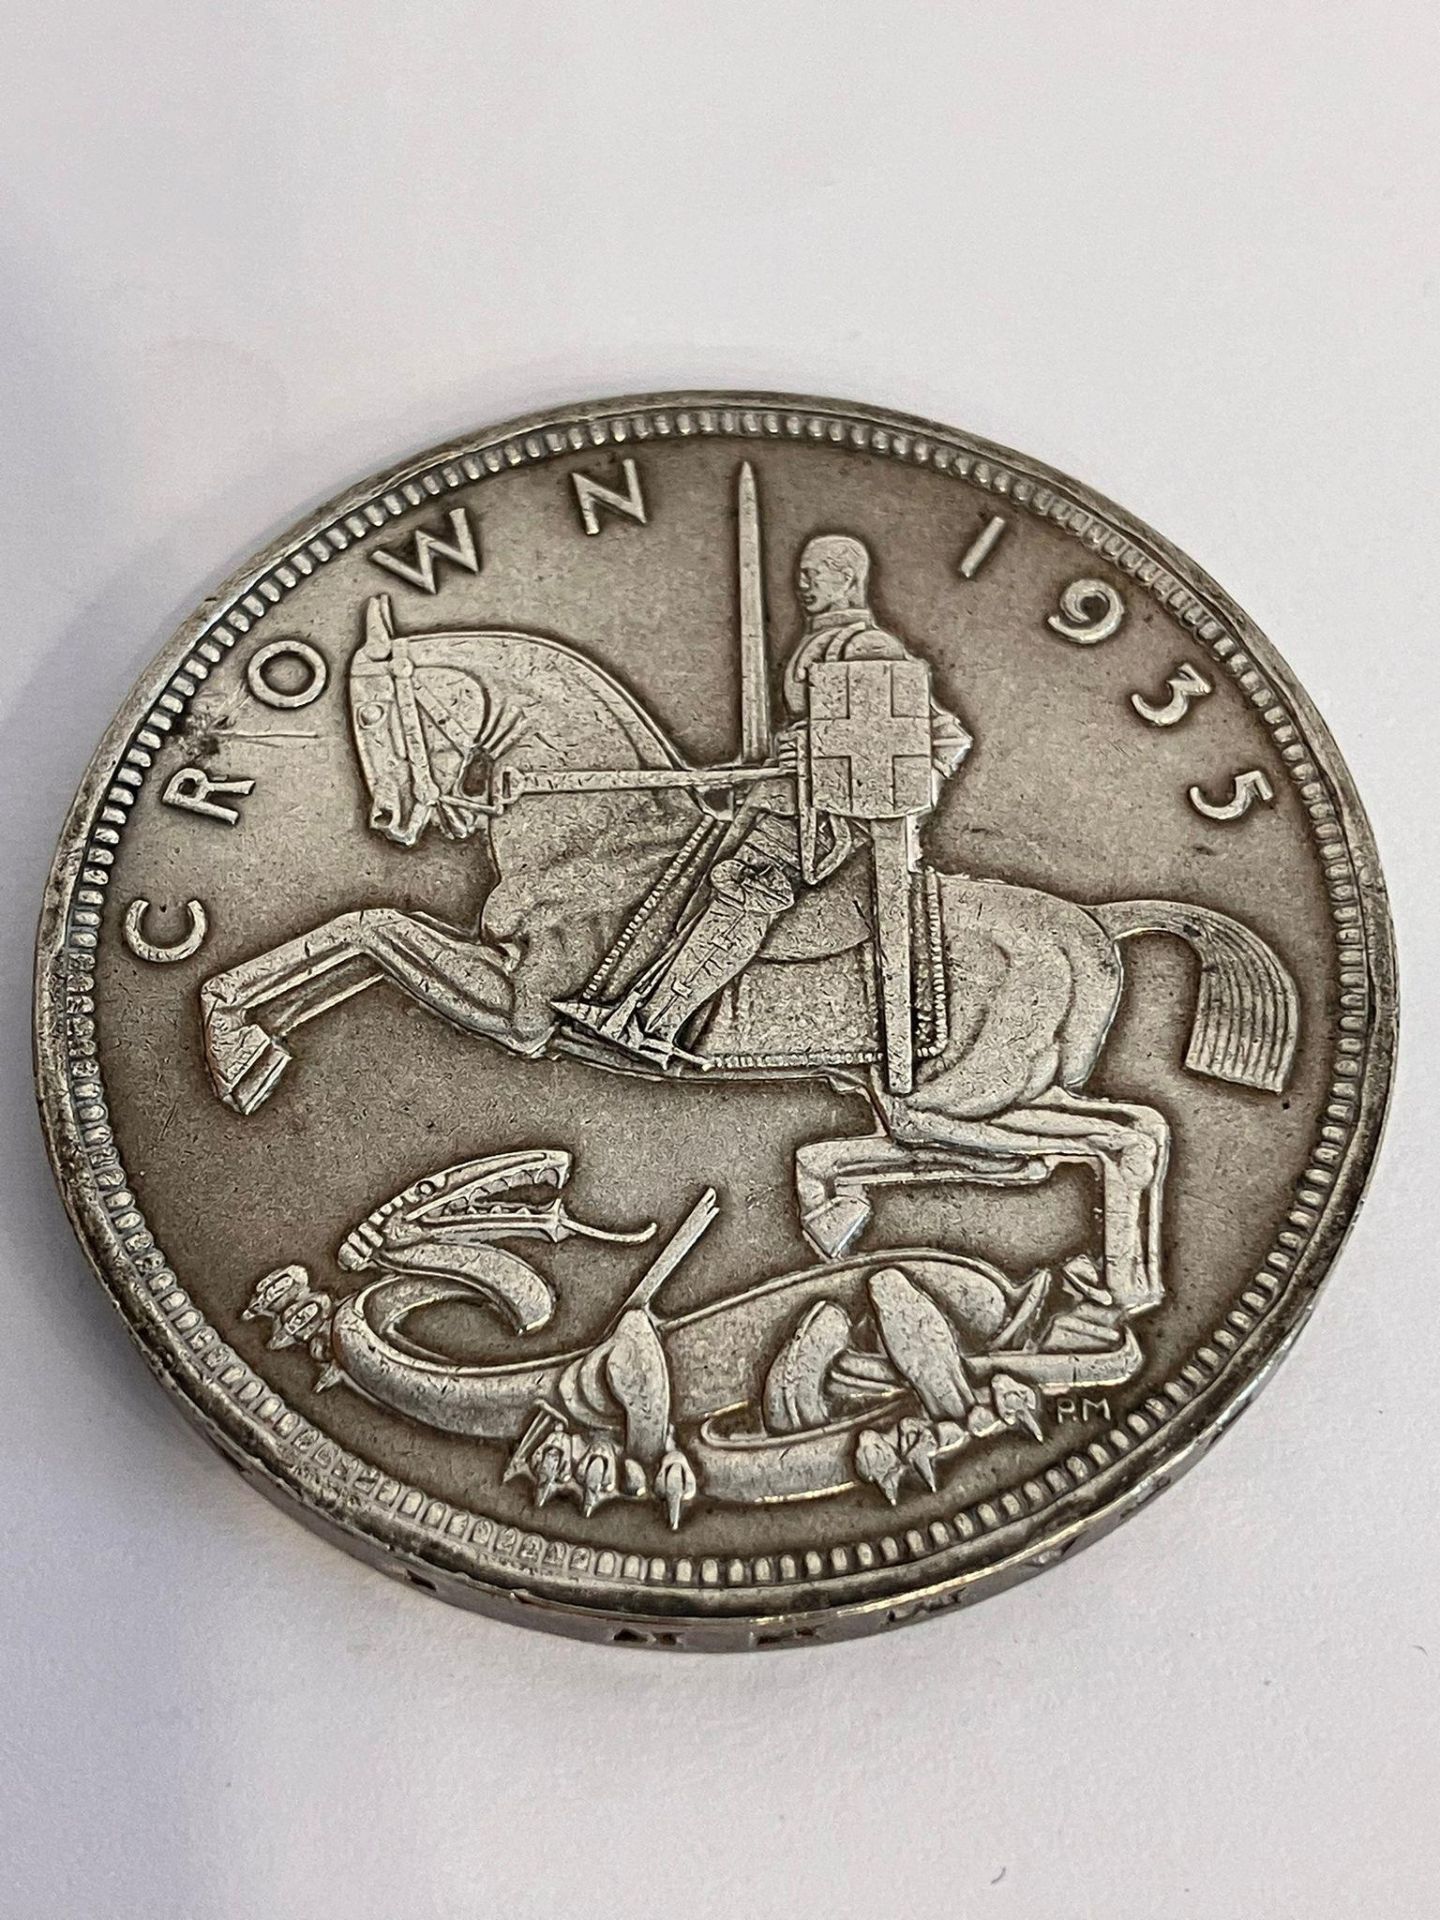 1935 SILVER ROCKING HORSE CROWN. Very fine/Extra finecondition. Having exceptional bold and raised - Bild 2 aus 2